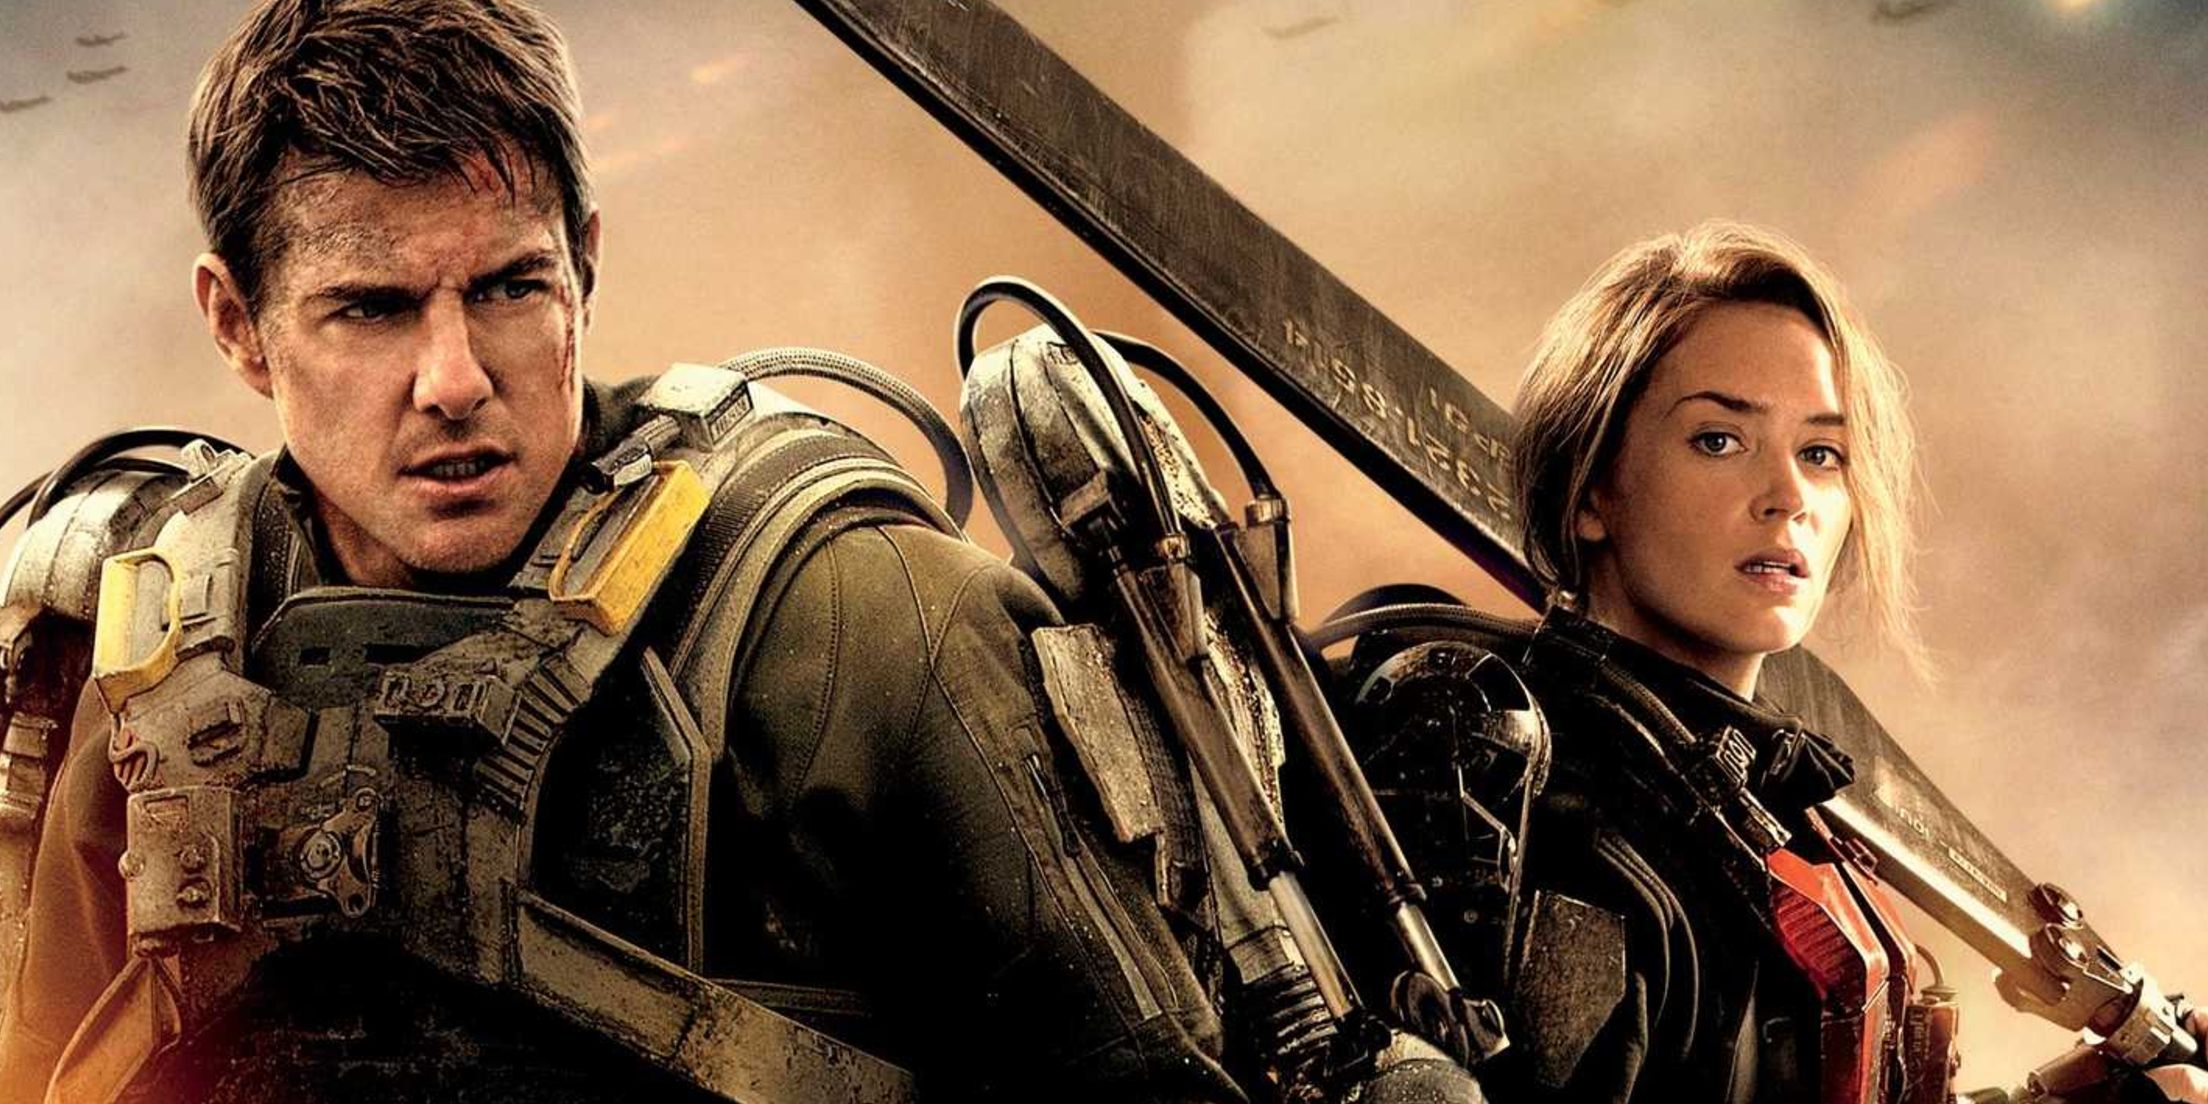 Edge of Tomorrow: How Many Times Tom Cruise’s Cage Dies In The Movie